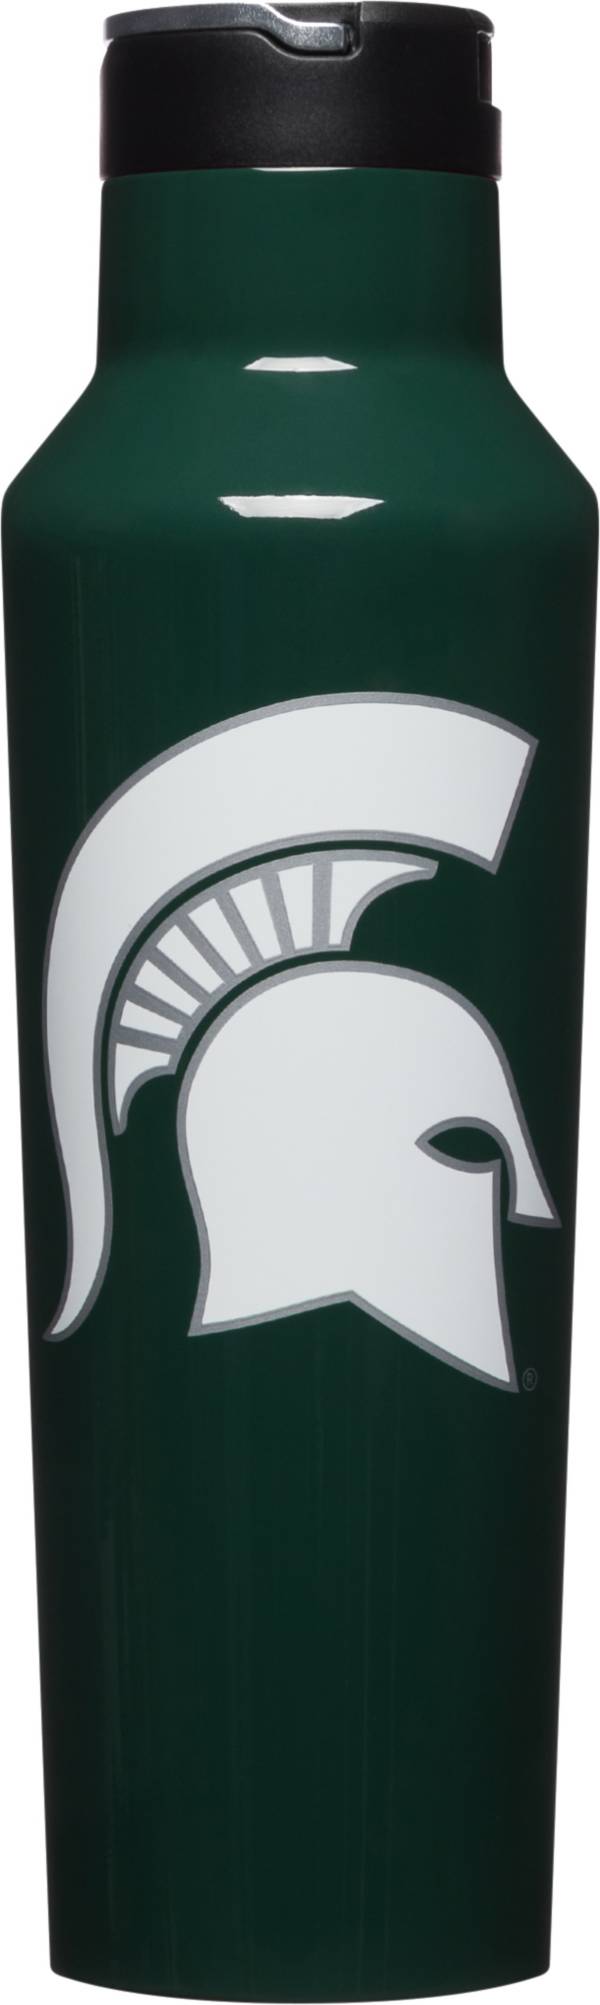 Corkcicle Michigan State Spartans 20oz. Canteen product image